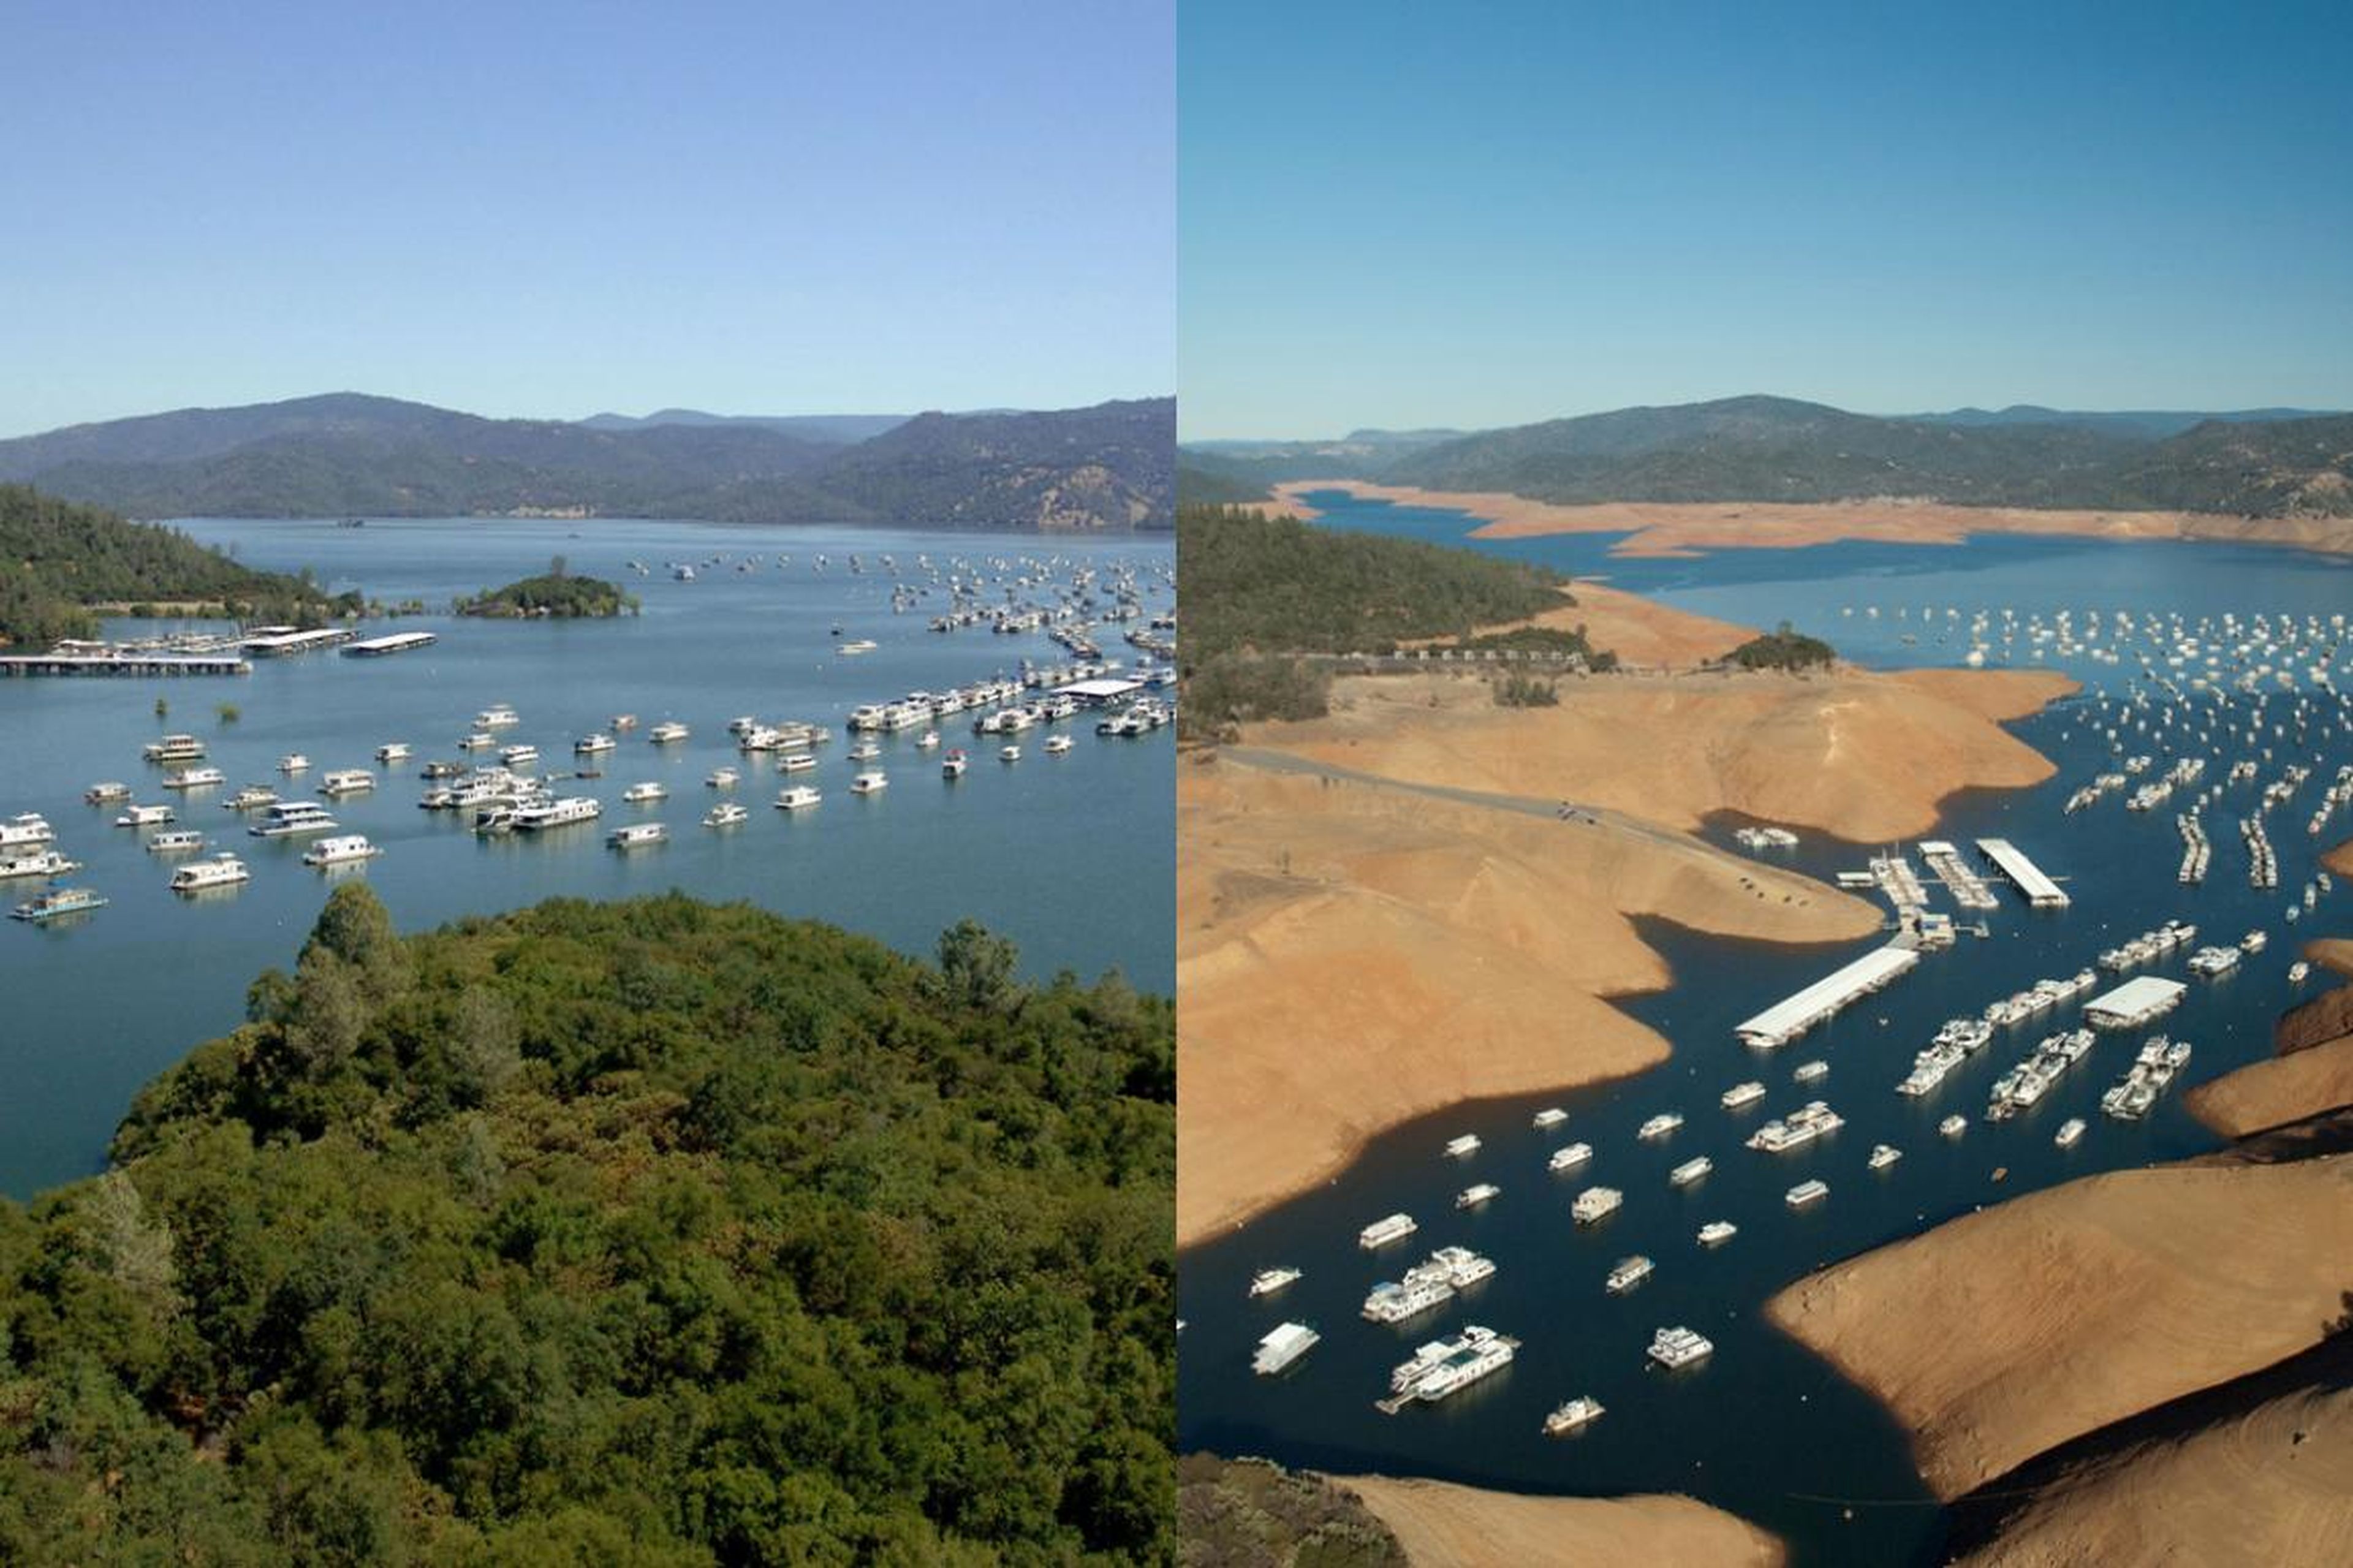 These side-by-side photos show how much California's Lake Oroville shrank in just three years, from July 2011 (left) to August 2014 (right).